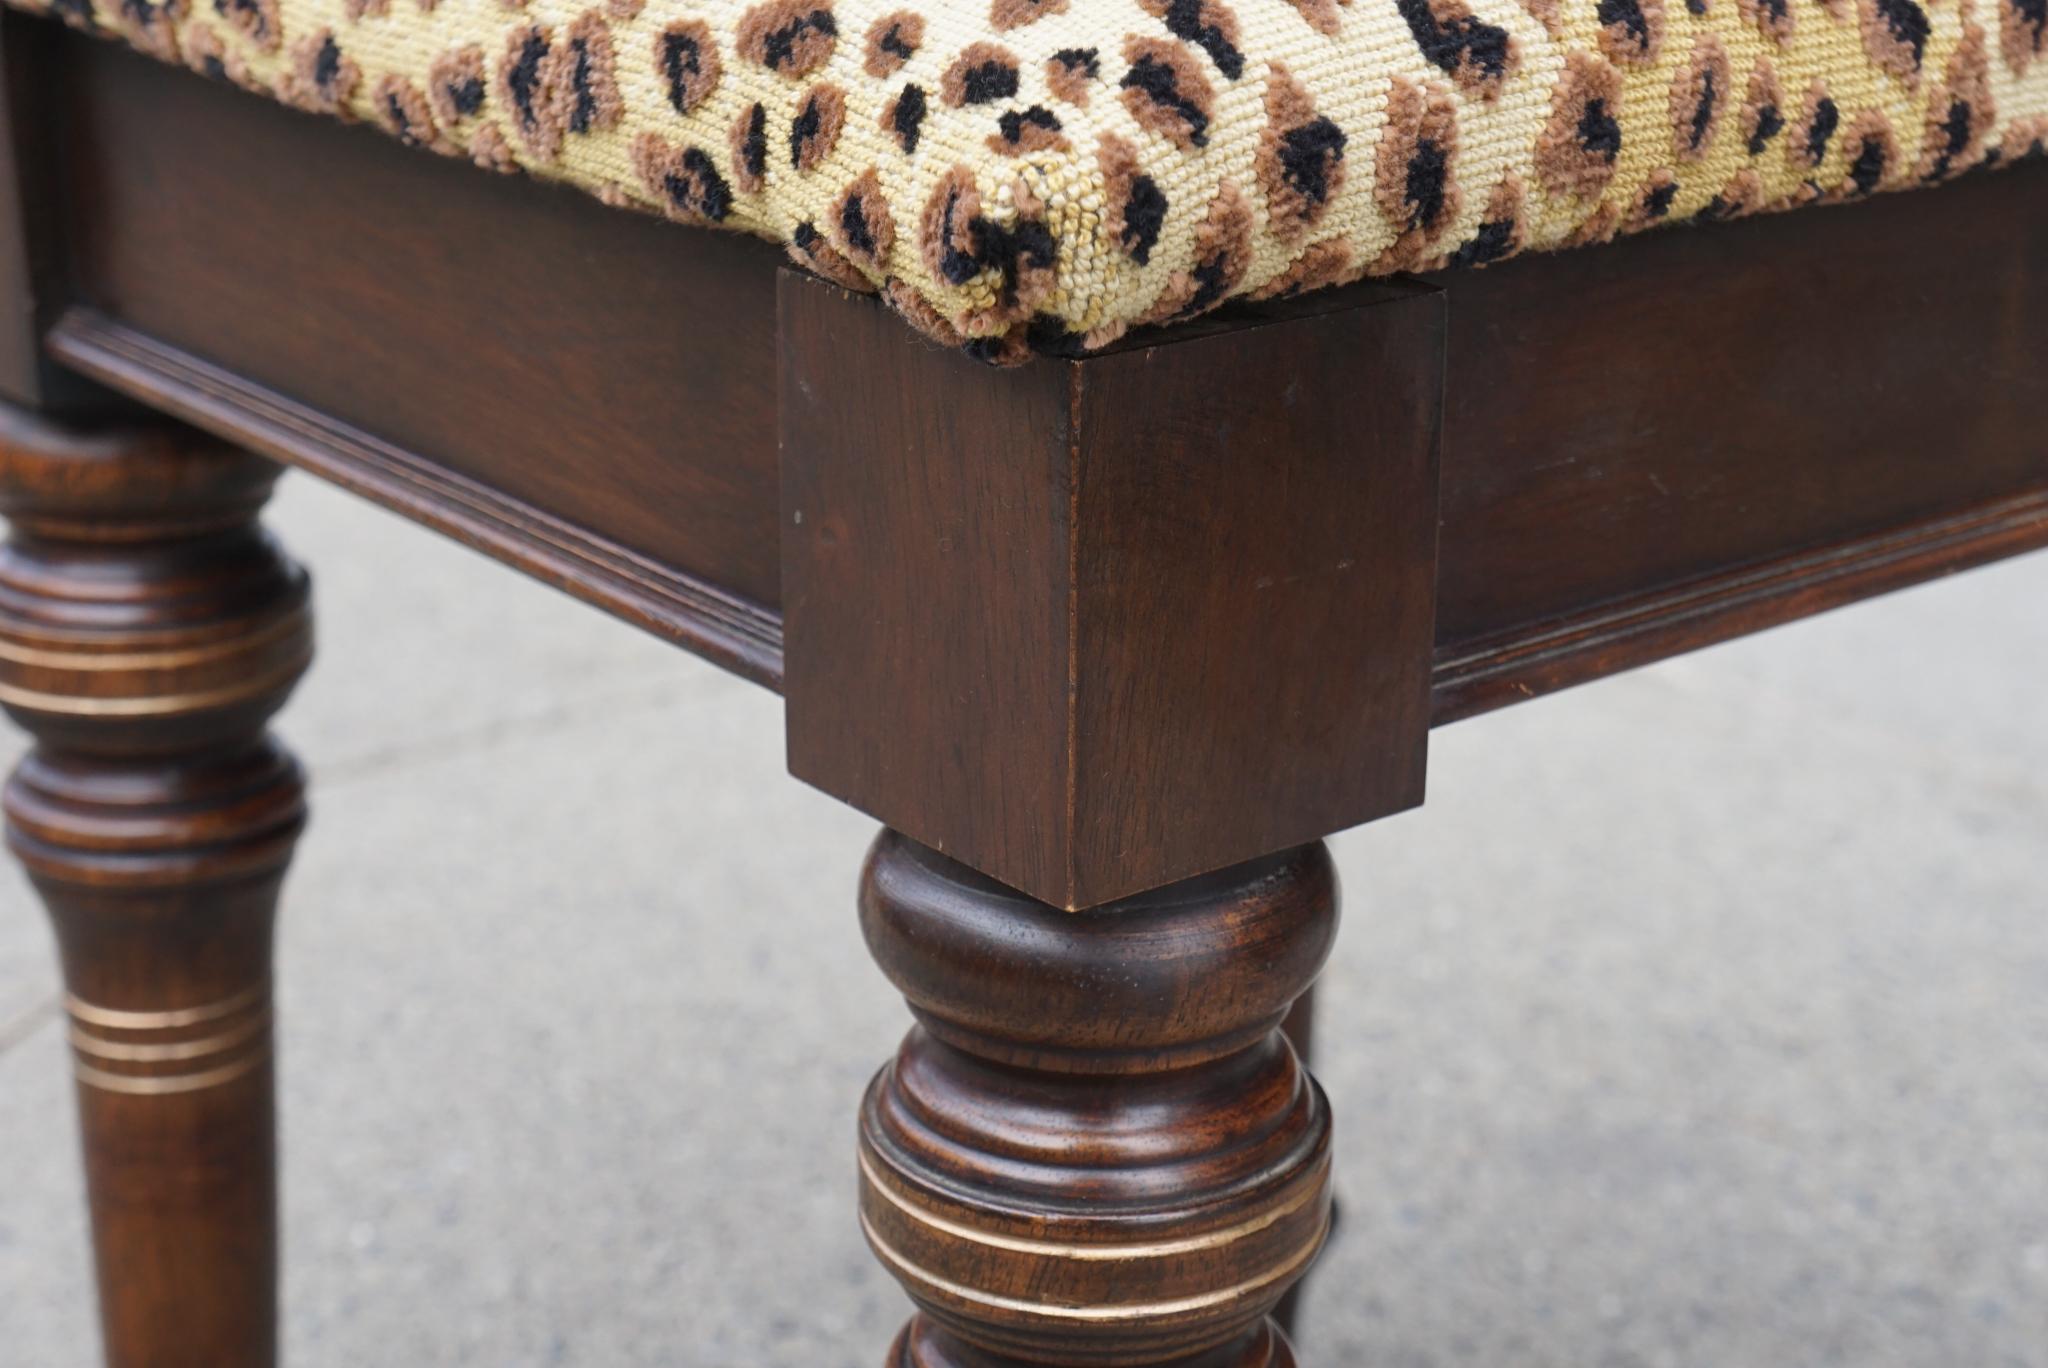 Walnut Period Aesthetics Movement Foot Stool In Good Condition For Sale In Hudson, NY